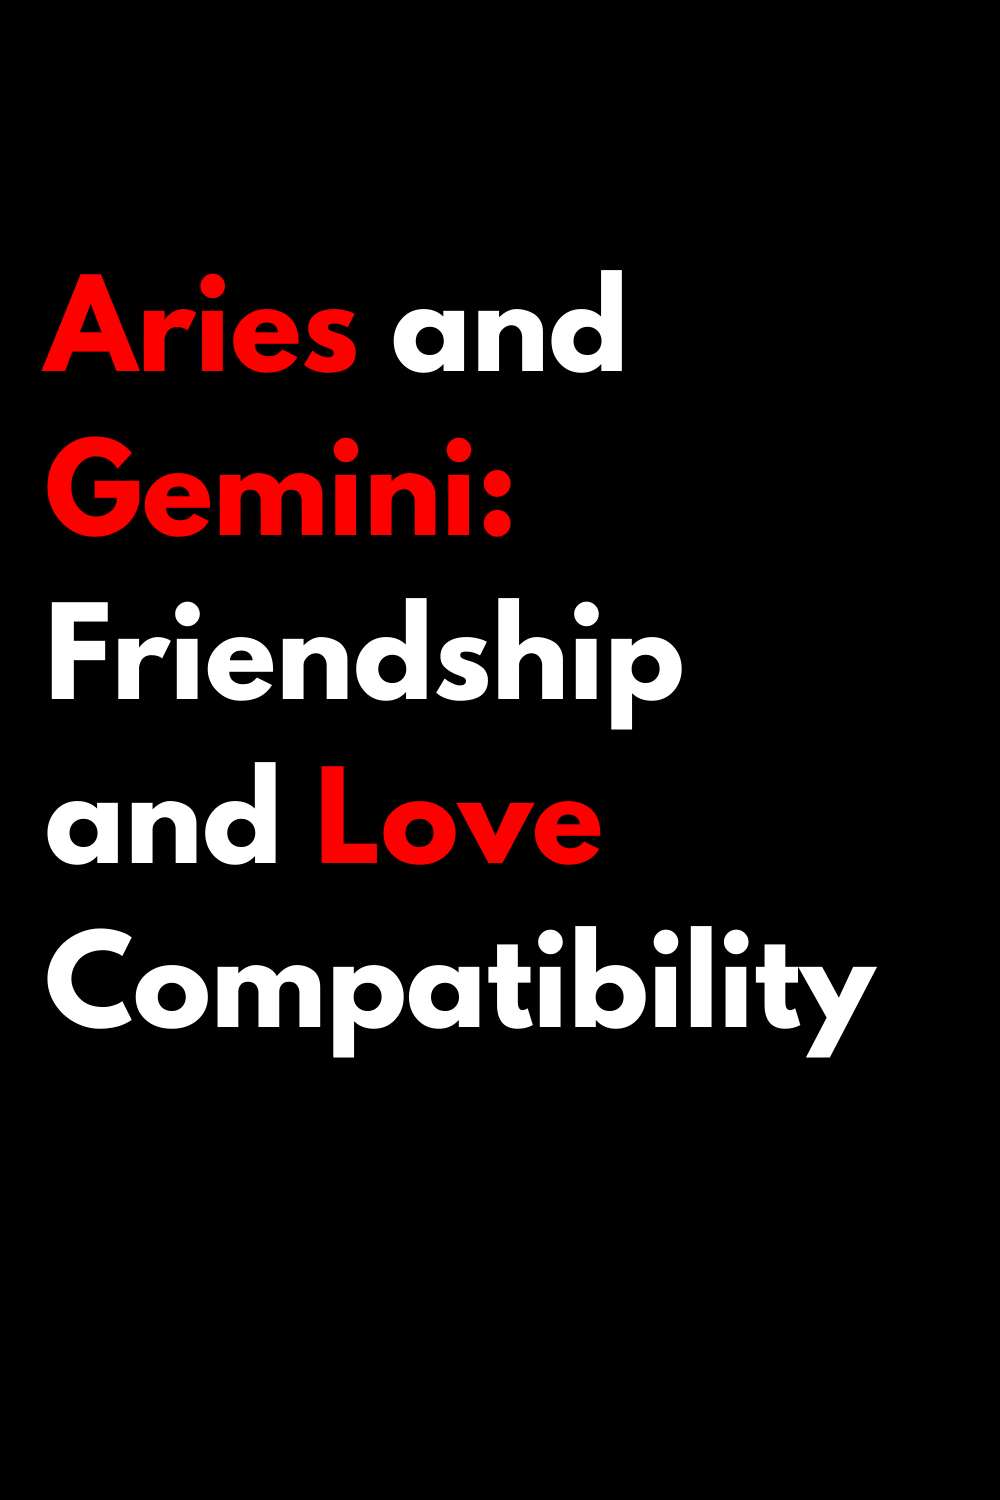 Aries and Gemini: Friendship and Love Compatibility